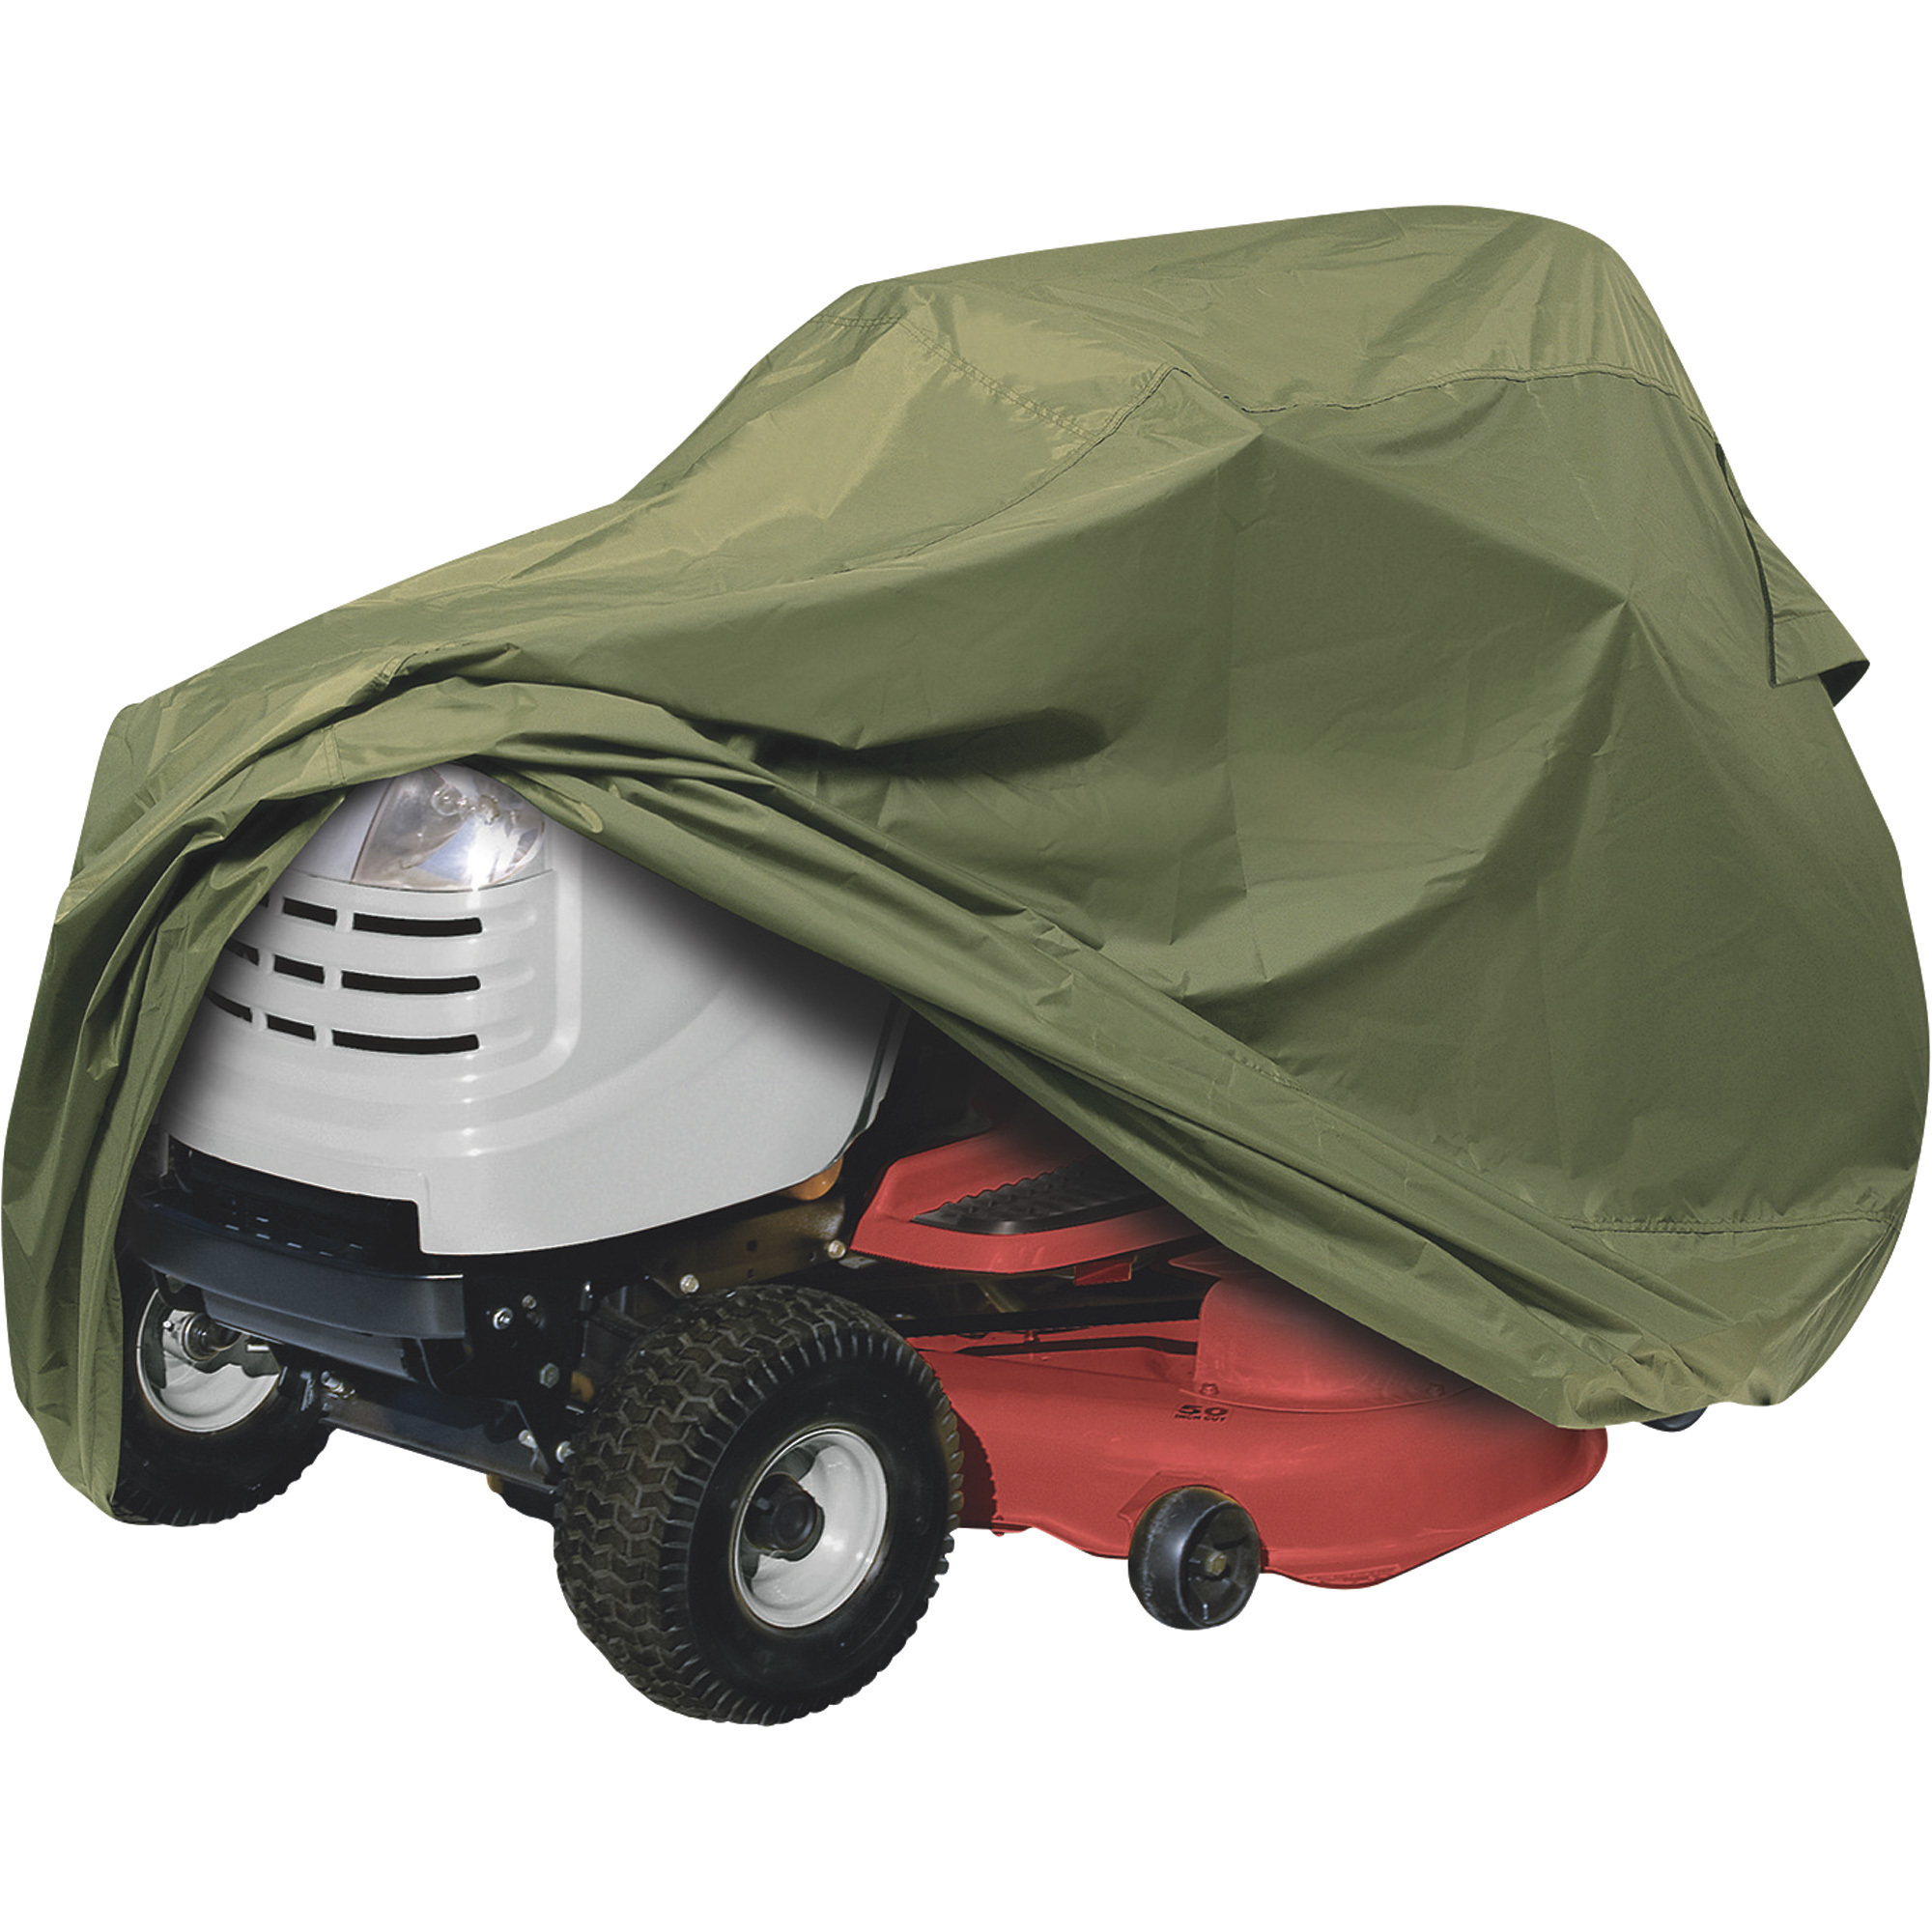 Classic Accessories Riding Lawn Mower Cover, Olive, 72Inch L x 44Inch W x 46Inch H, Model 73910